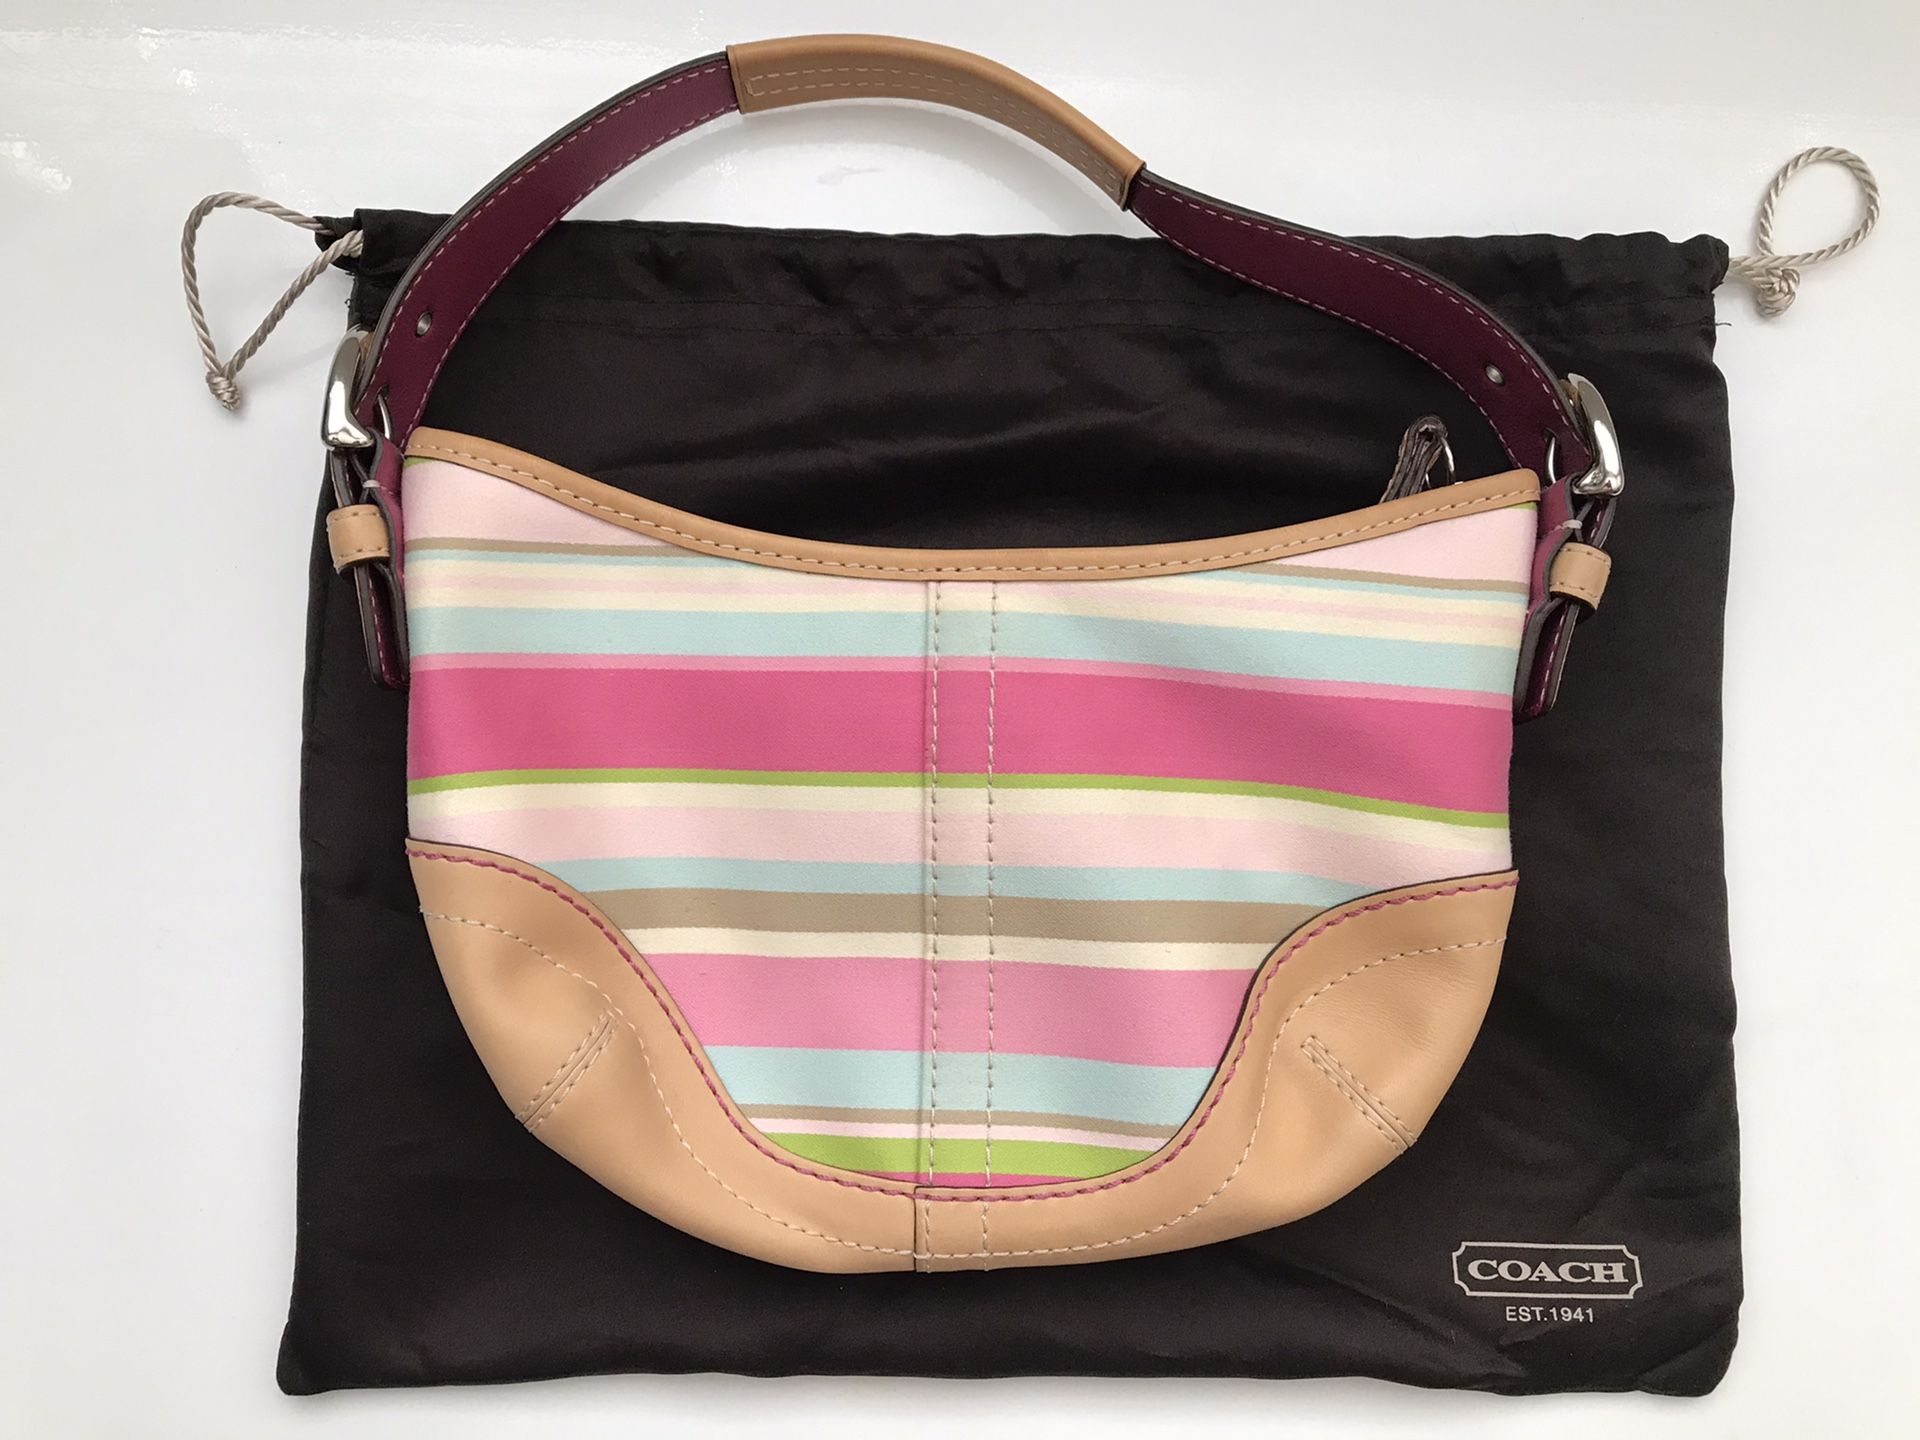 COACH PINK BLUE STRIPE FABRIC PURSE NATURAL LEATHER ACCENTS SMALL SOHO HOBO BAG.